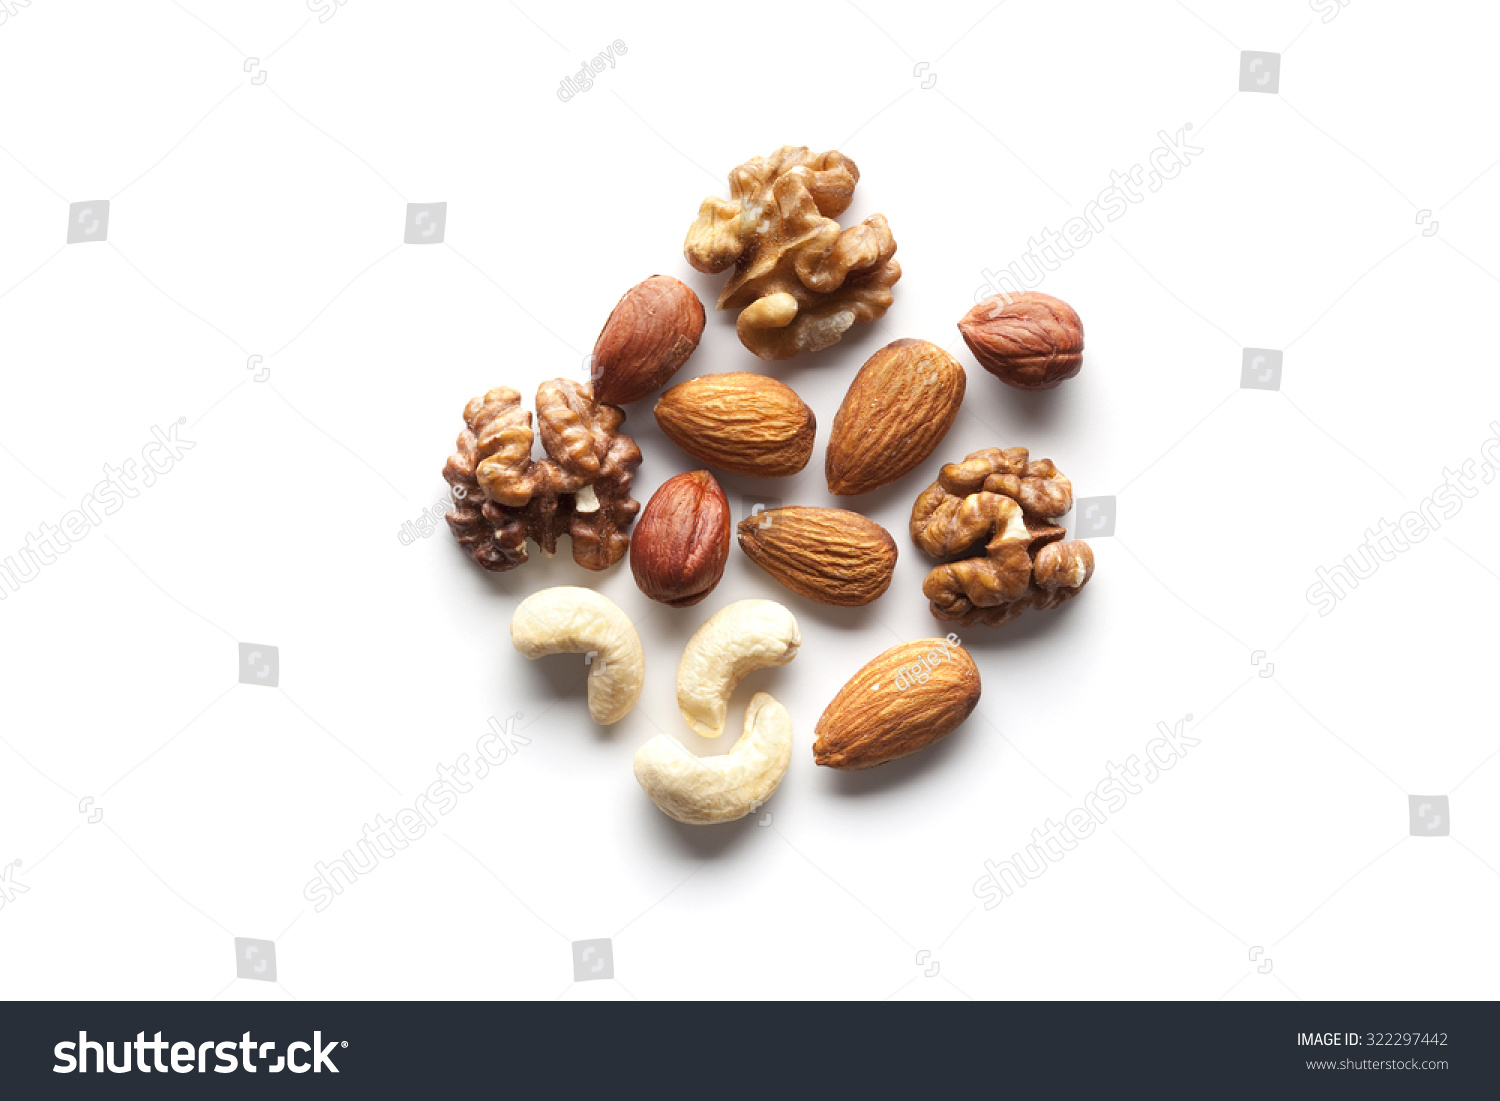 Assorted mixed nuts #322297442